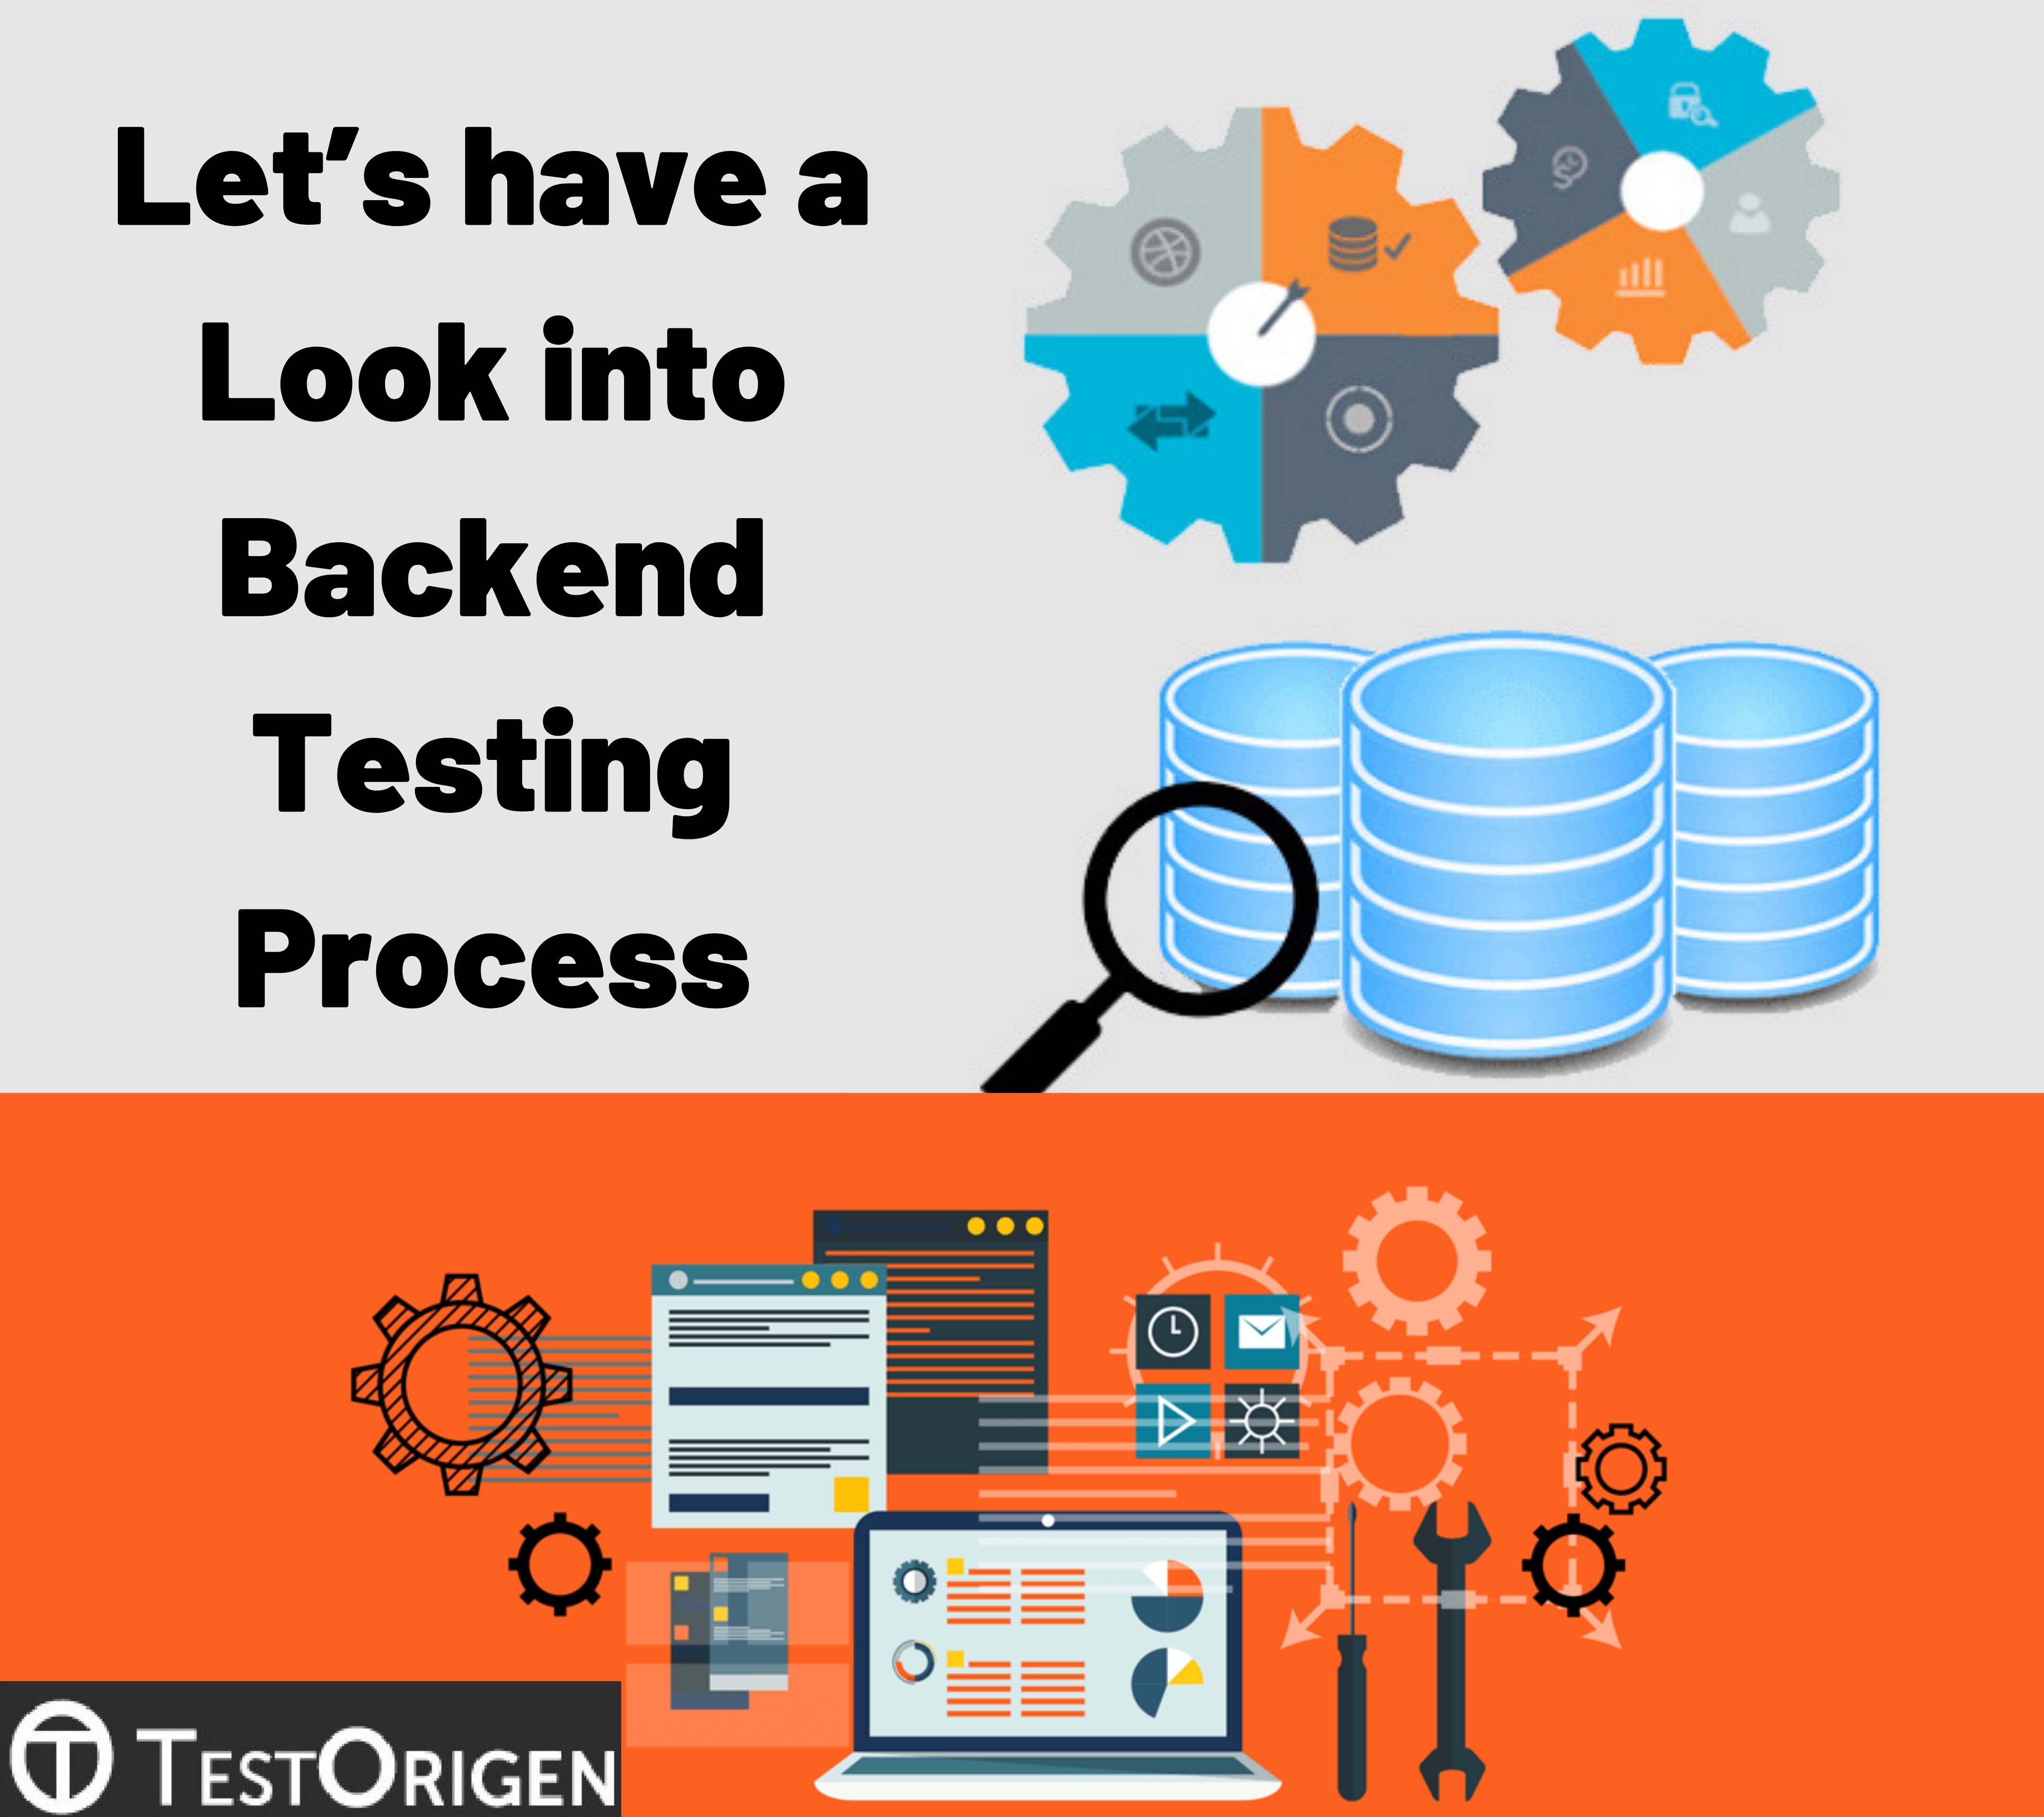 Let’s have a Look into Backend Testing Process